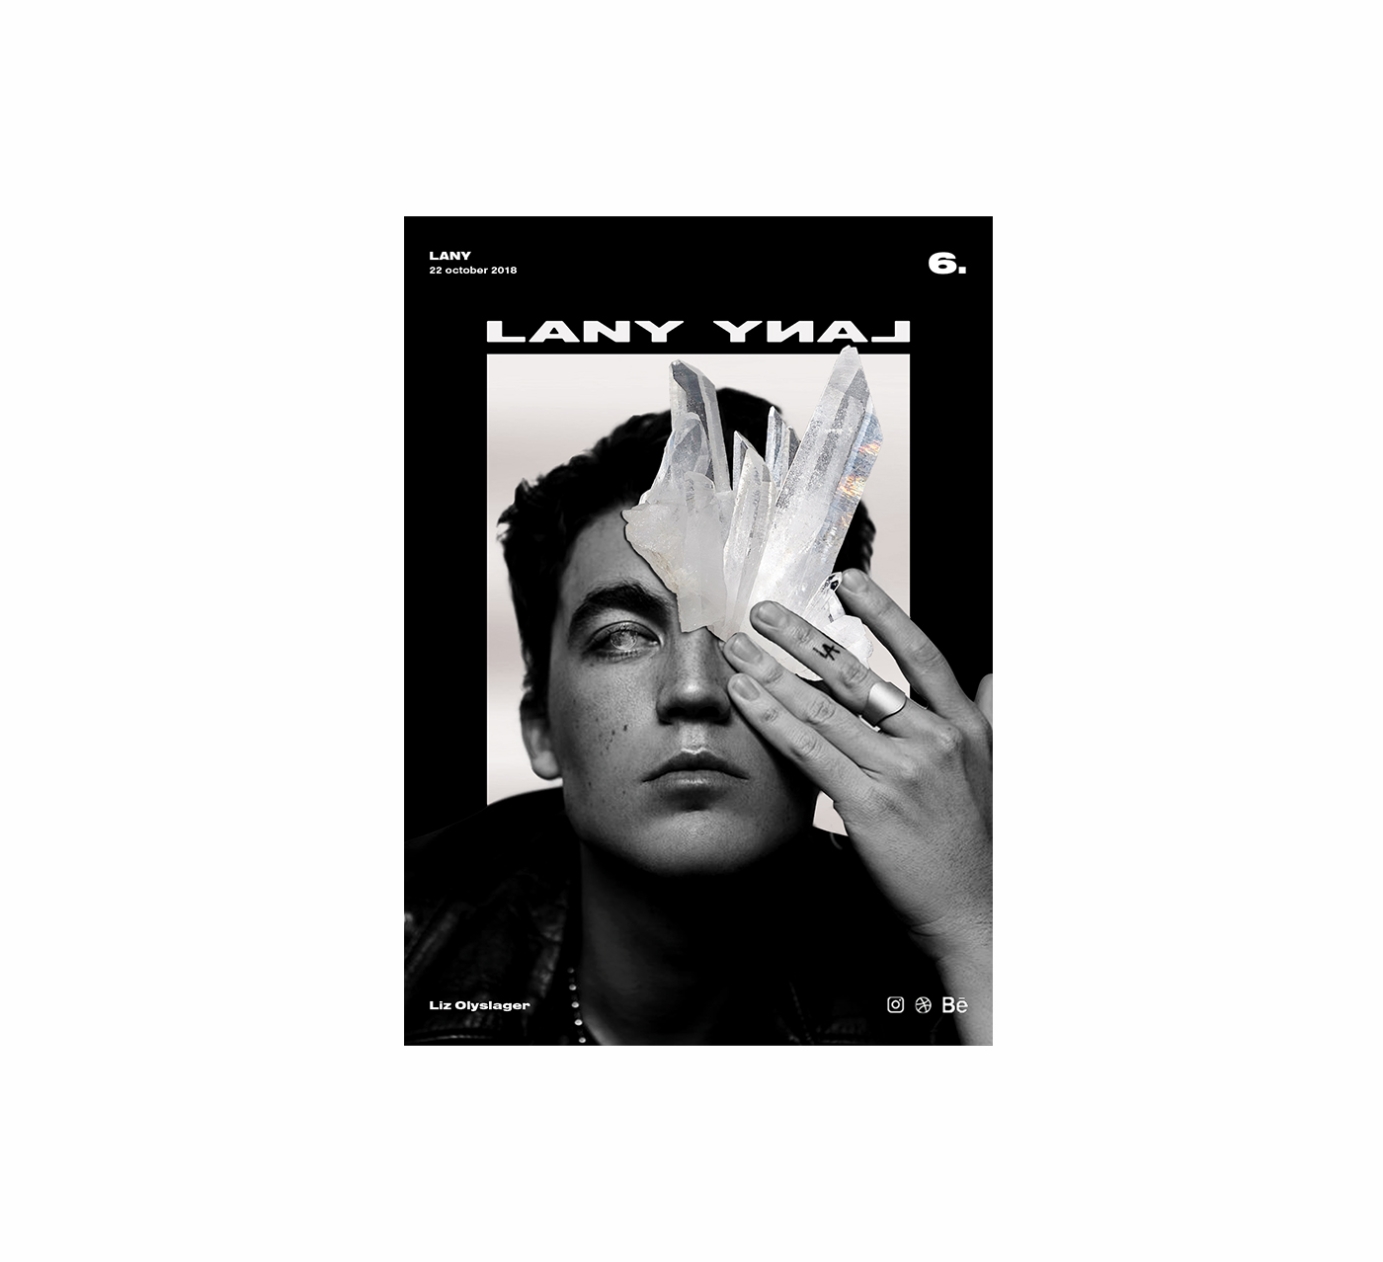 Graphic design for LANY, Moses Sumney by Lizolyslager